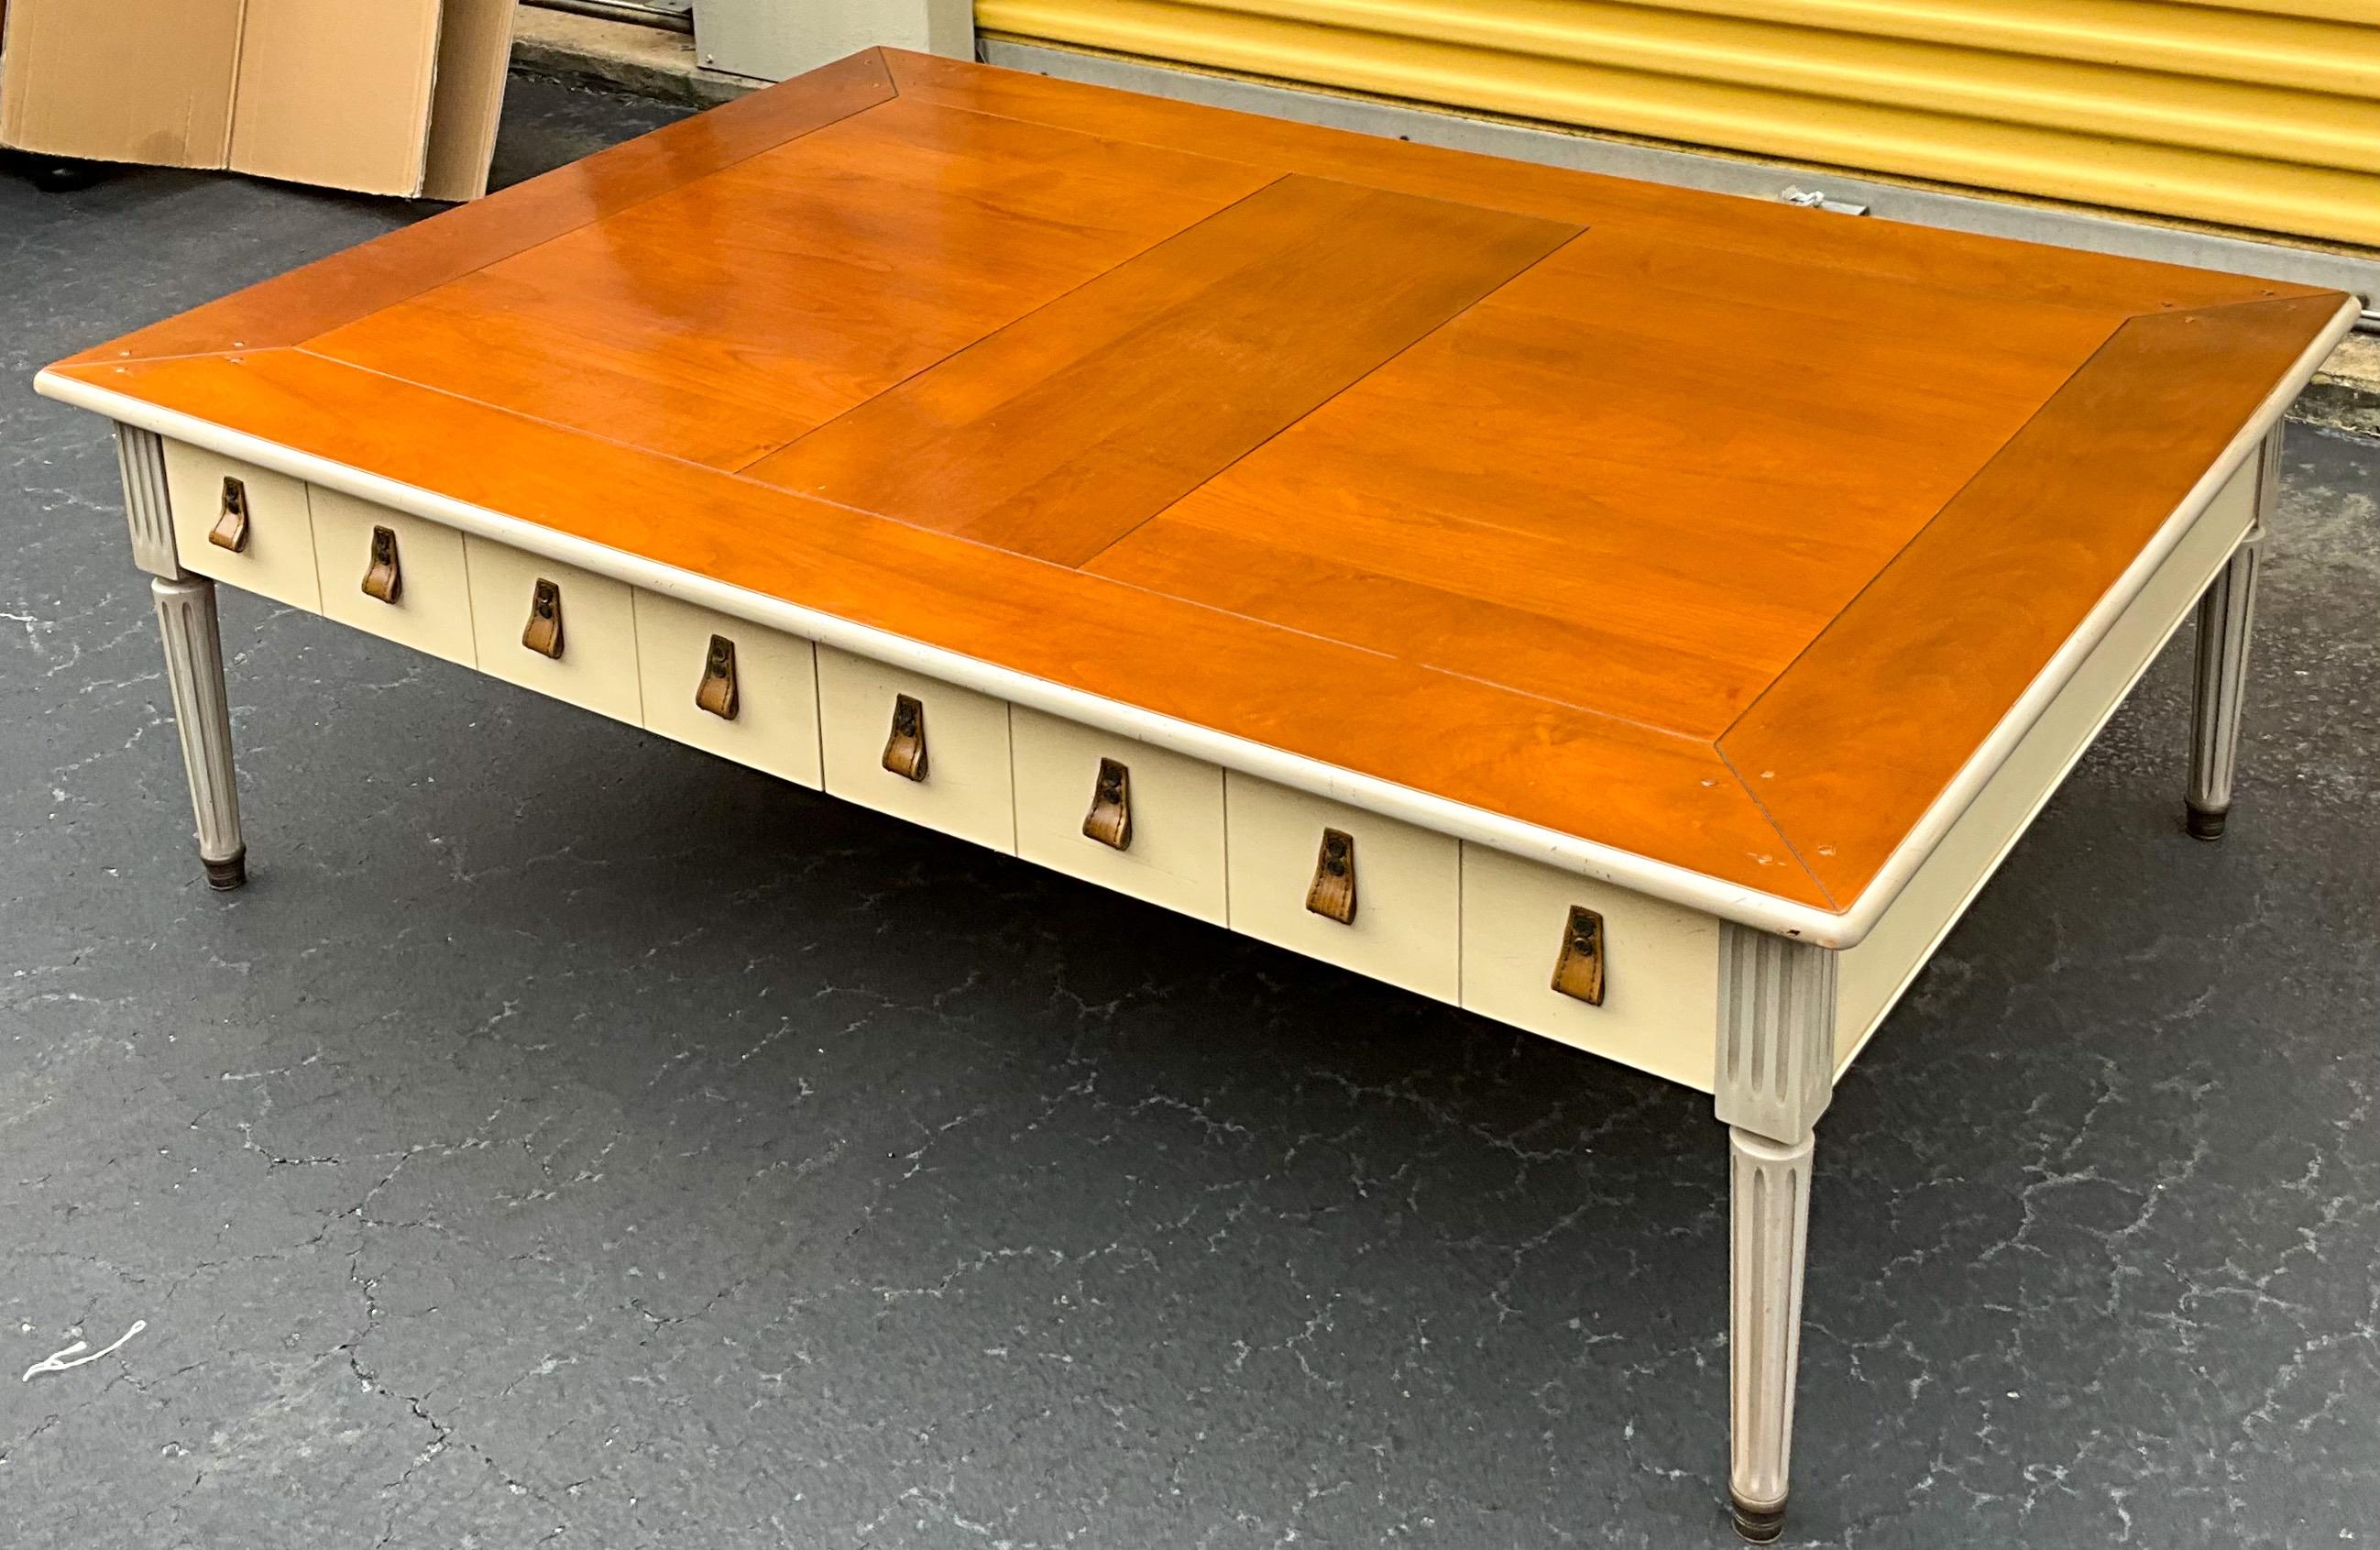 This is a late 20th century French gray painted coffee table with Swedish styling by Grange. The piece is so unique! The top appears to be cherry, and the painted legs and apron are in a French gray and ivory. My favorite feature is the partner